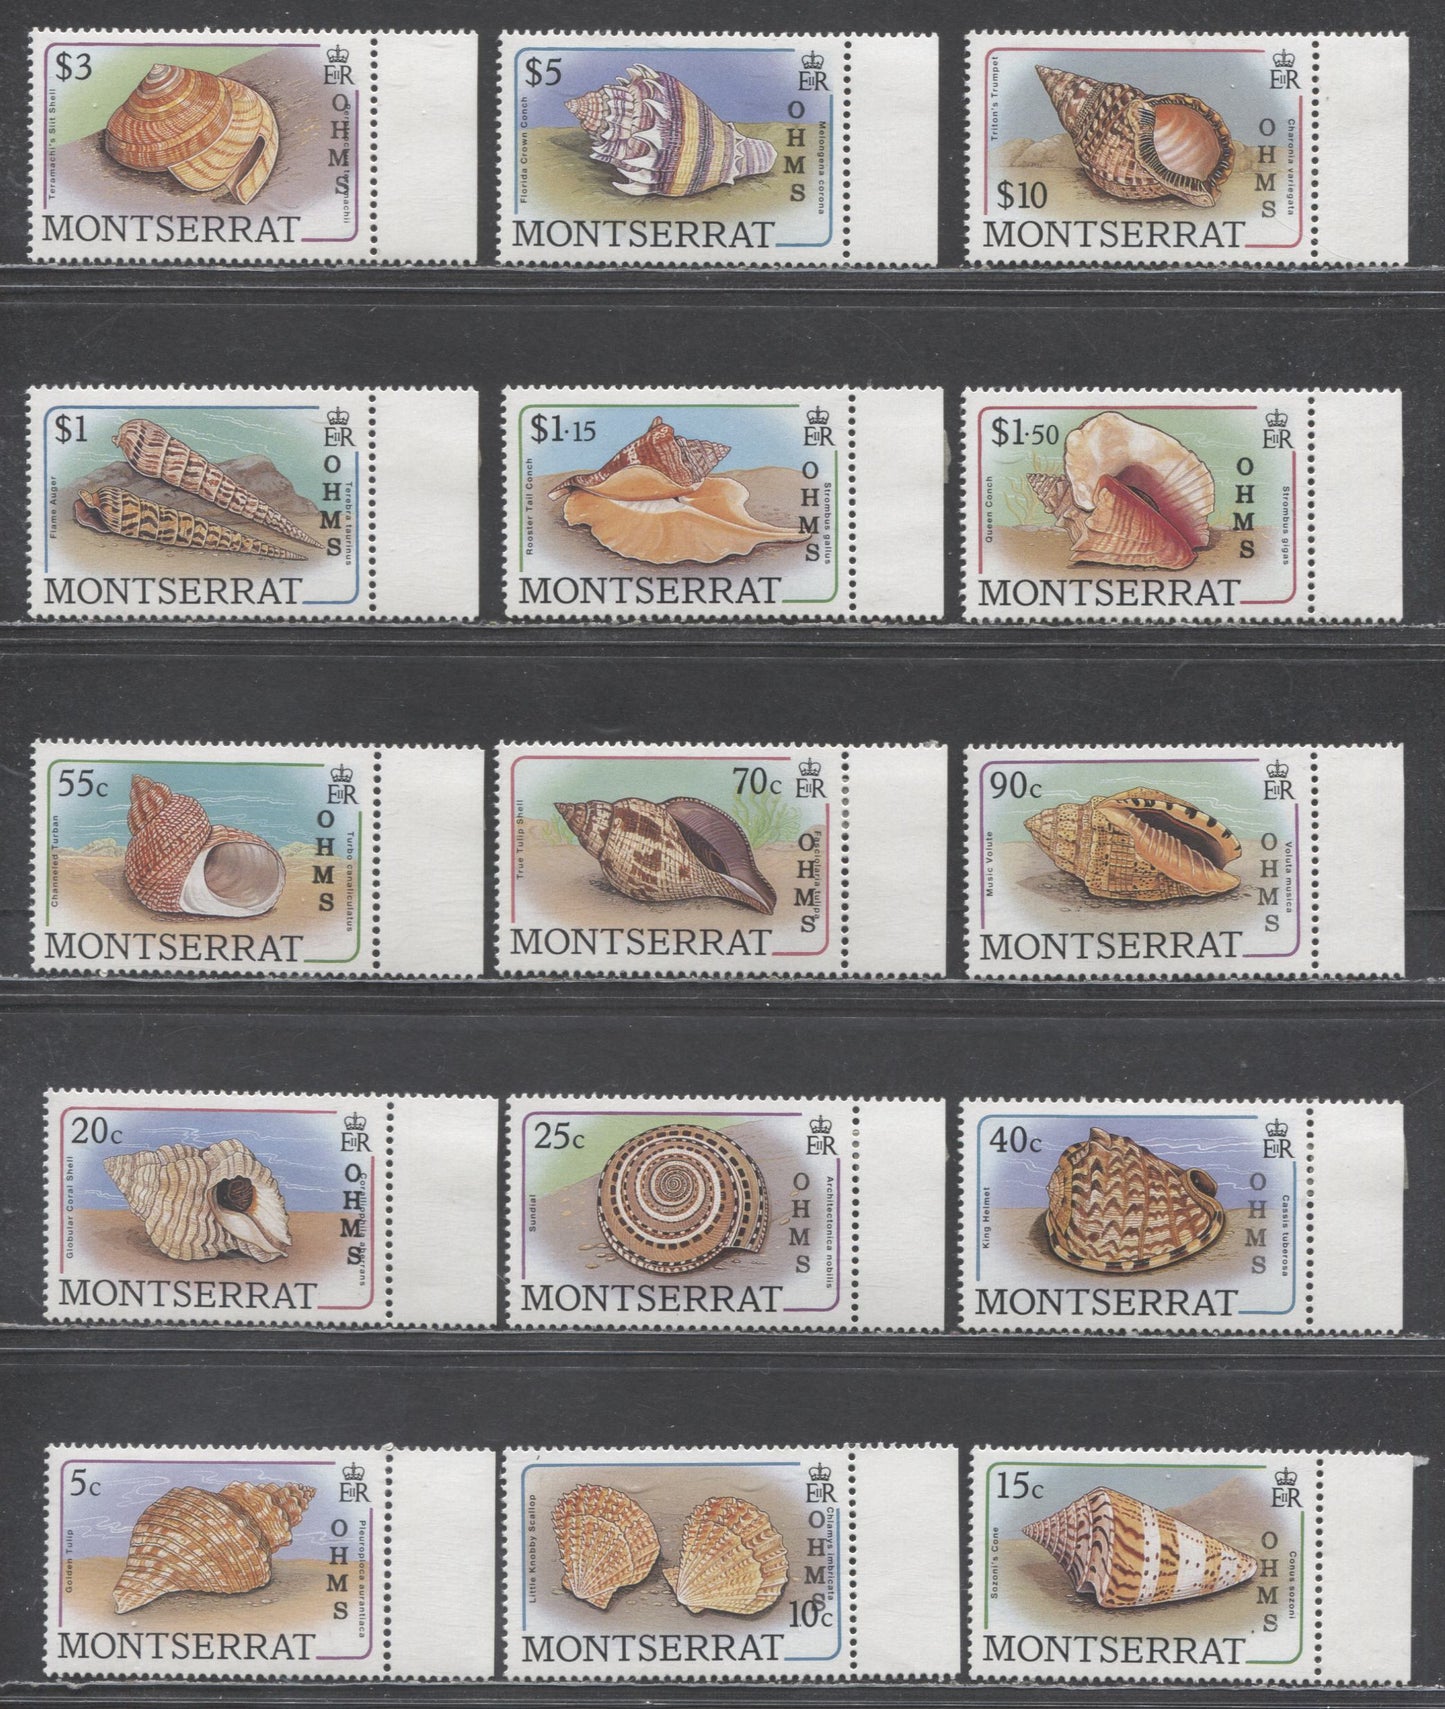 Lot 91 Montserrat SC#O79-O94 1989 Overprinted Seashell Issue, 15 VFOG Singles, Click on Listing to See ALL Pictures, 2017 Scott Cat. $26.55